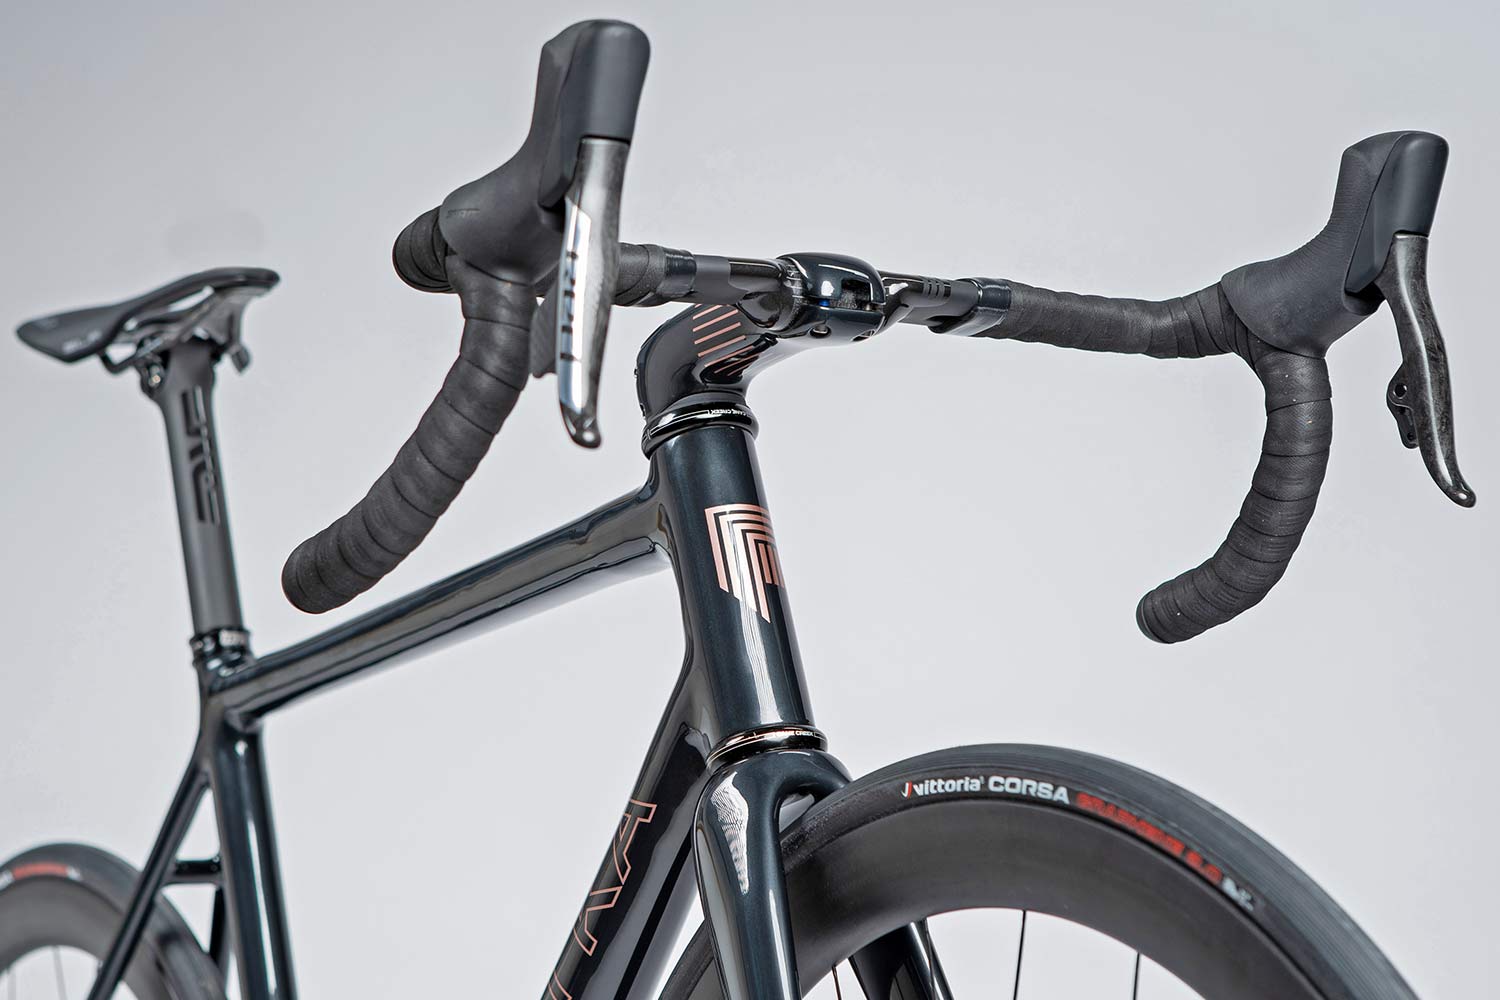 Festka Scalatore integrated next-gen lightweight carbon road bike, fully internal cable routing